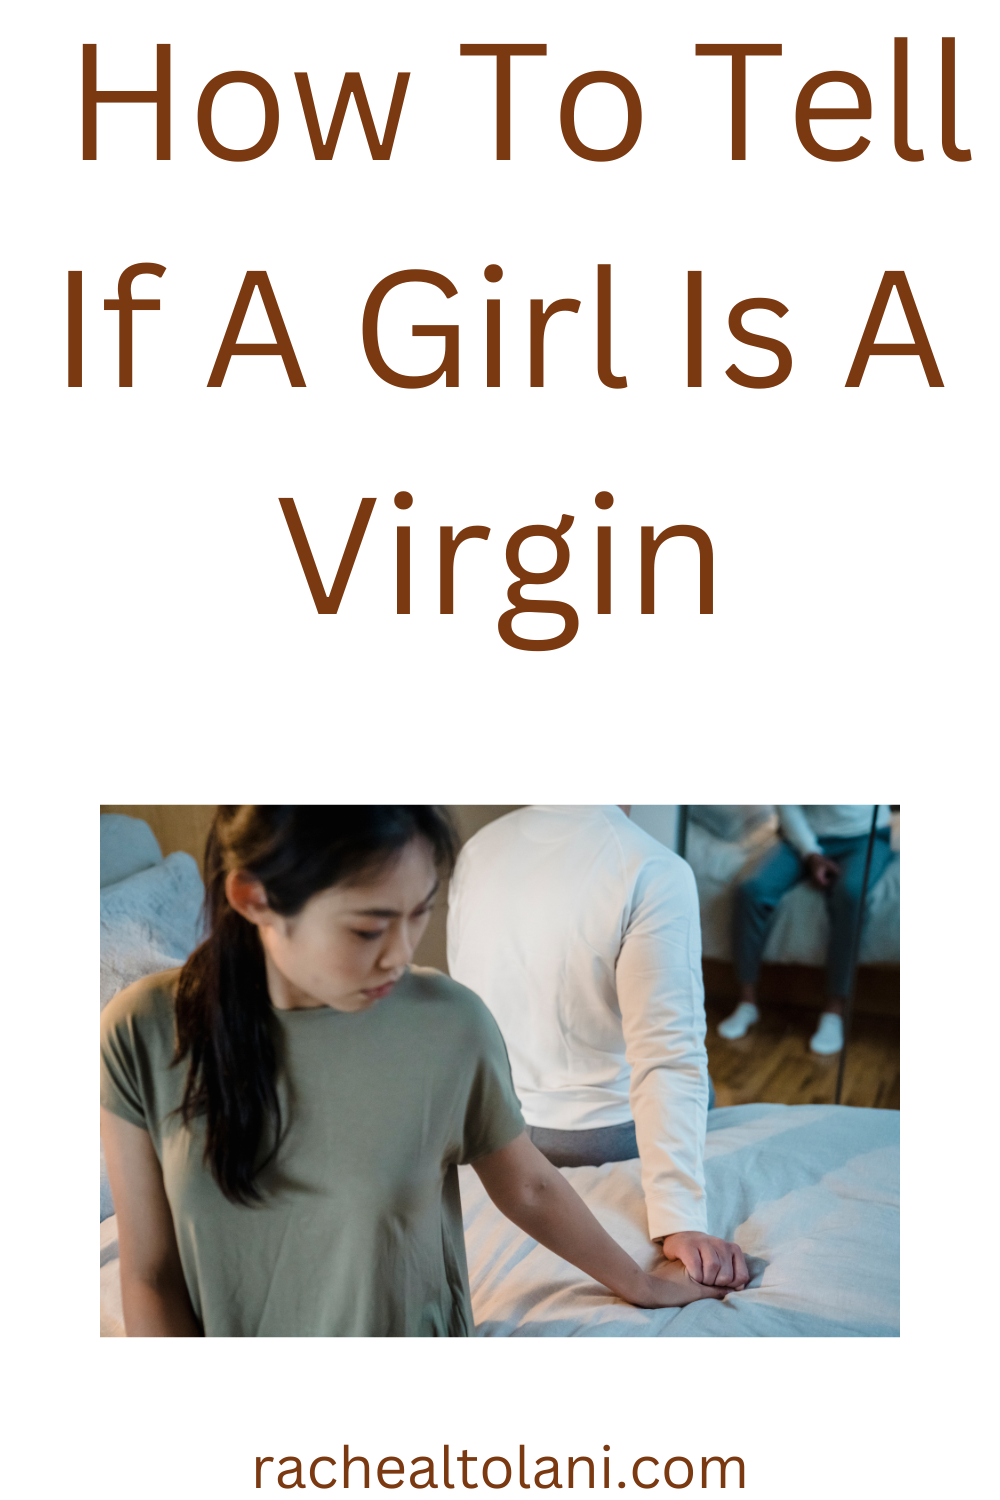 How to tell if a girl is a virgin